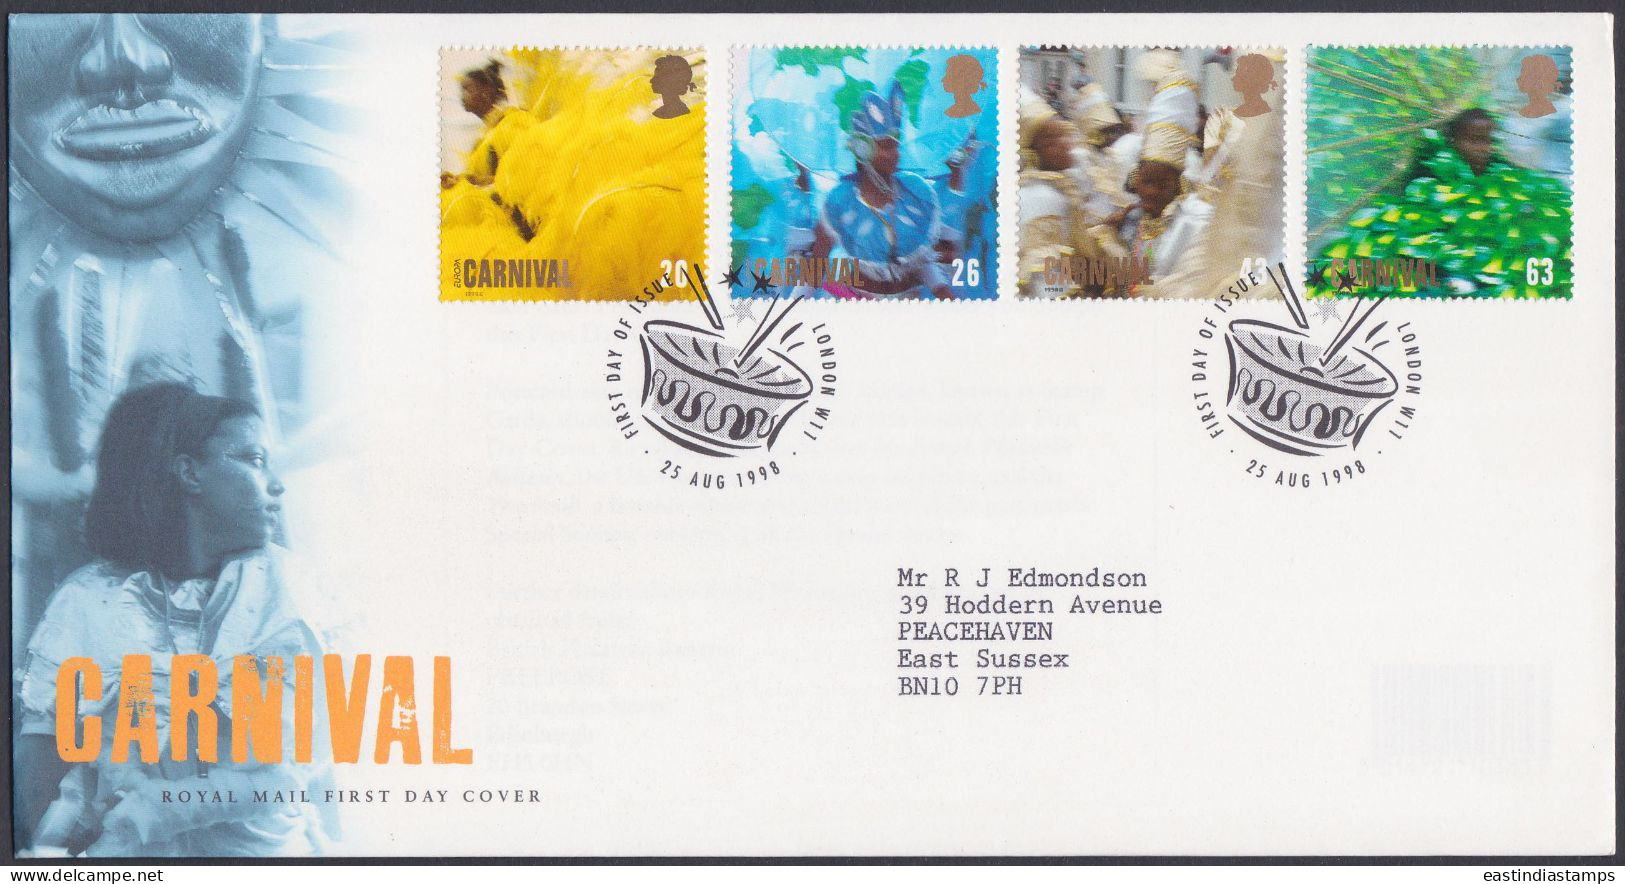 GB Great Britain 1998 FDC Carnival, Festival, Revelry, Music, Culture, Pictorial Postmark, First Day Cover - Cartas & Documentos